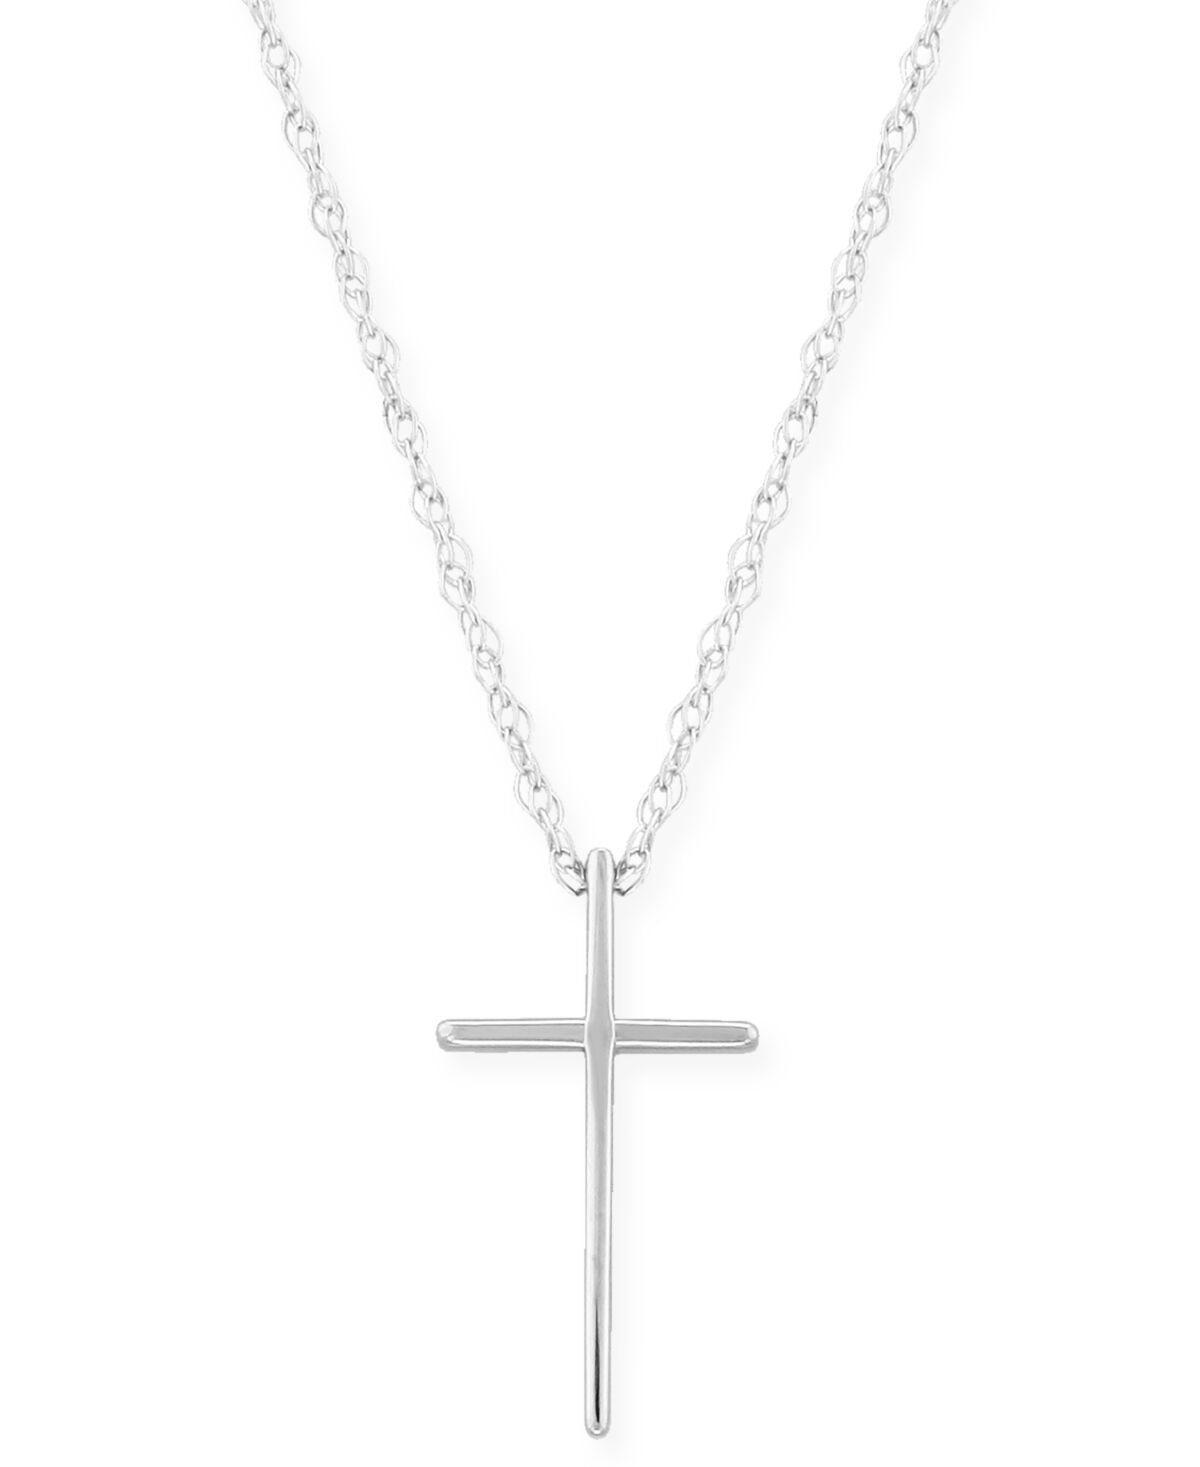 Macy's Solid Cross Necklace Set in 14k Yellow, White or Rose Gold - White Gold